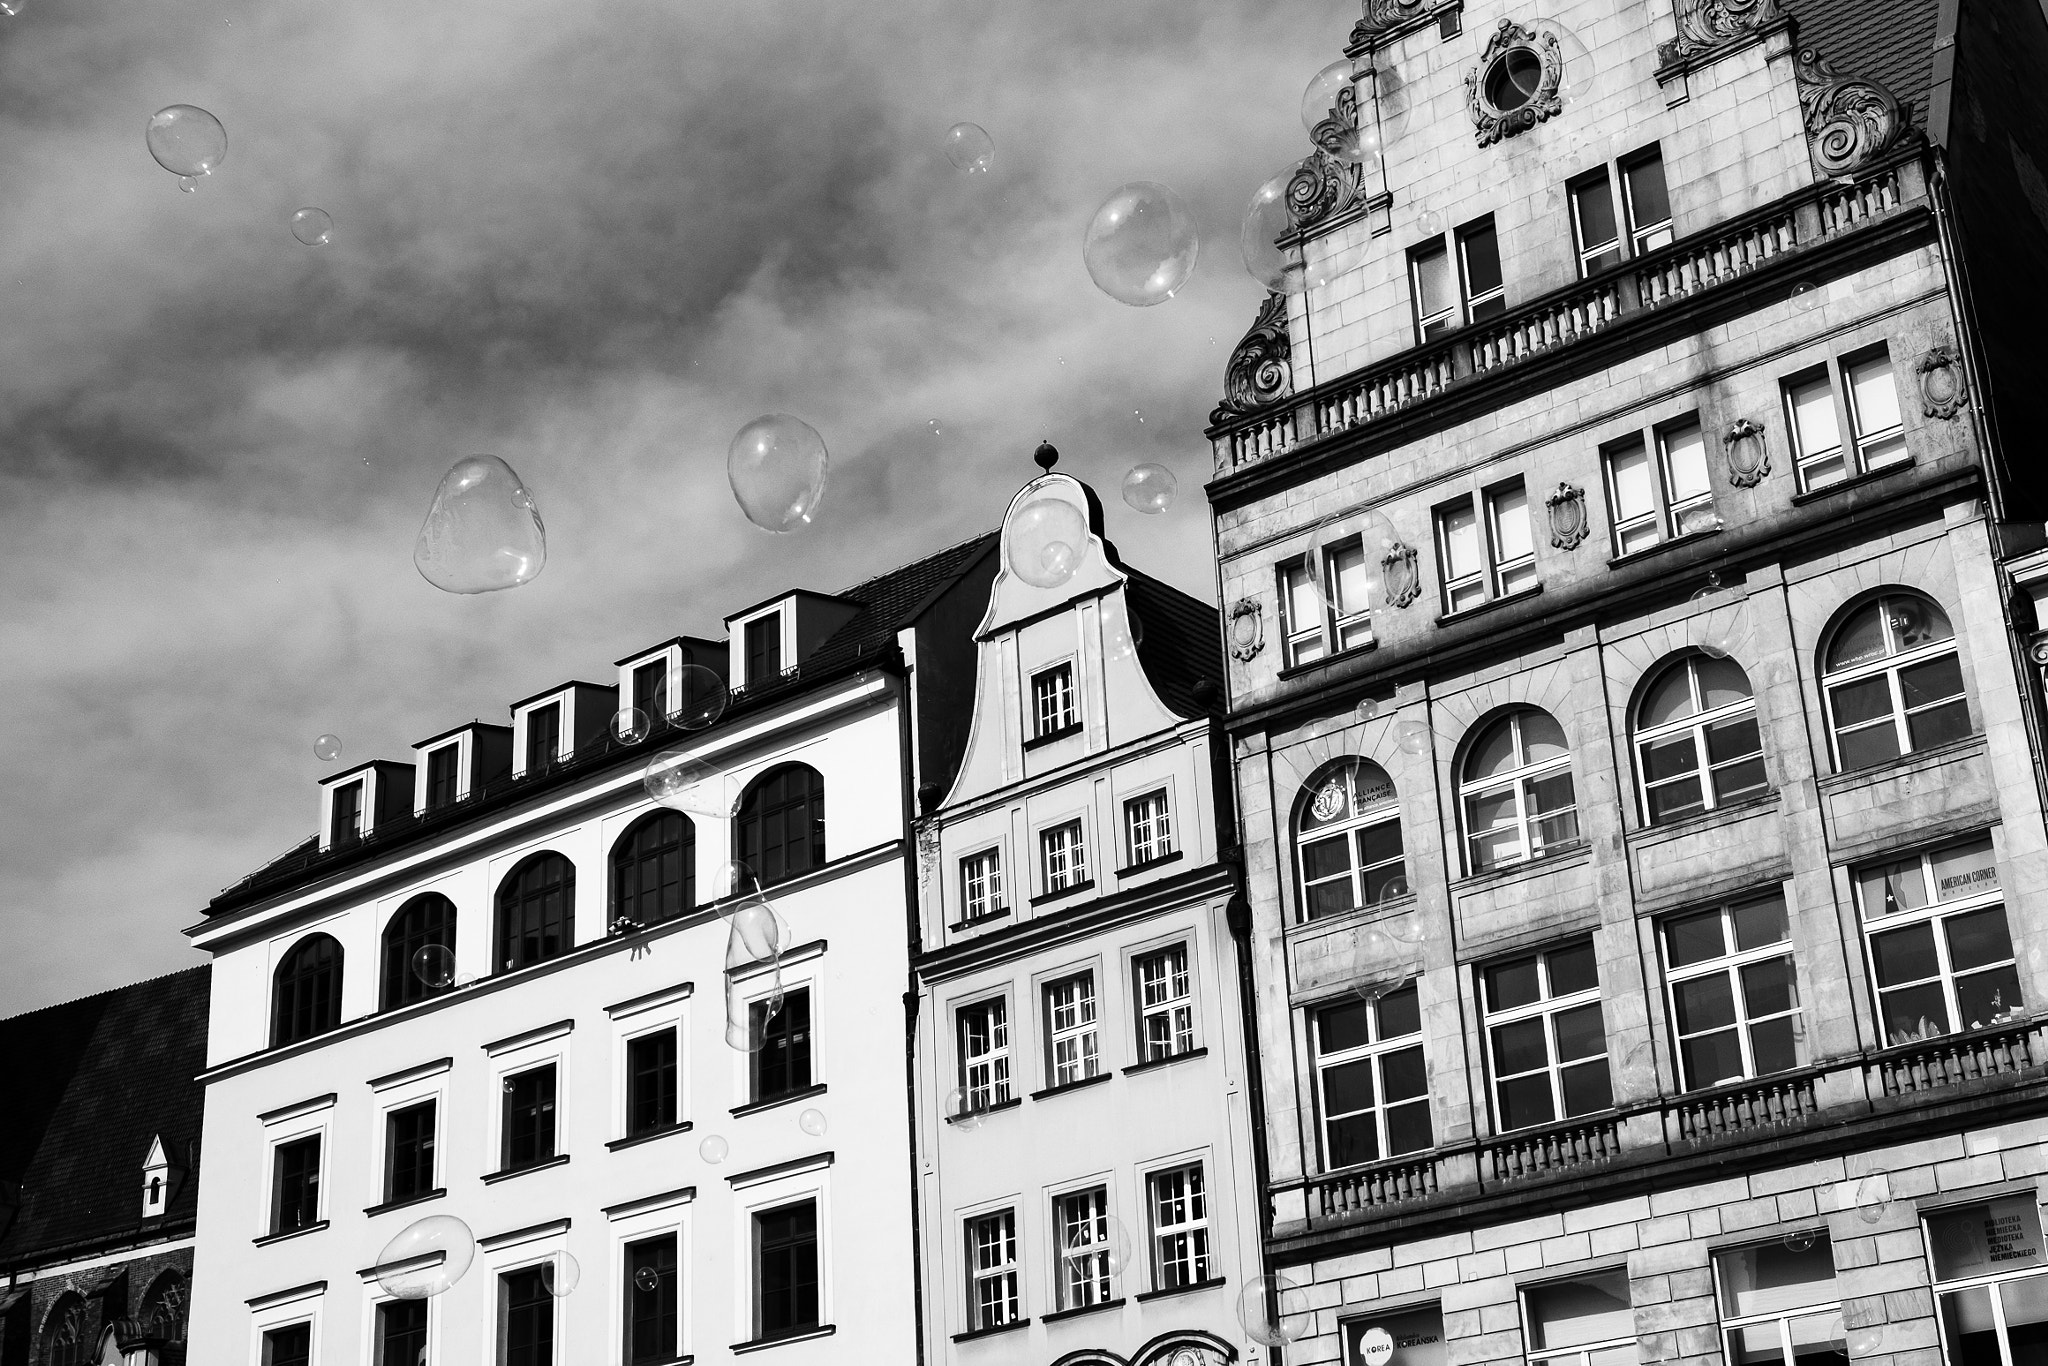 Fujifilm X-Pro1 sample photo. Old town buildings with soap bubbles photography